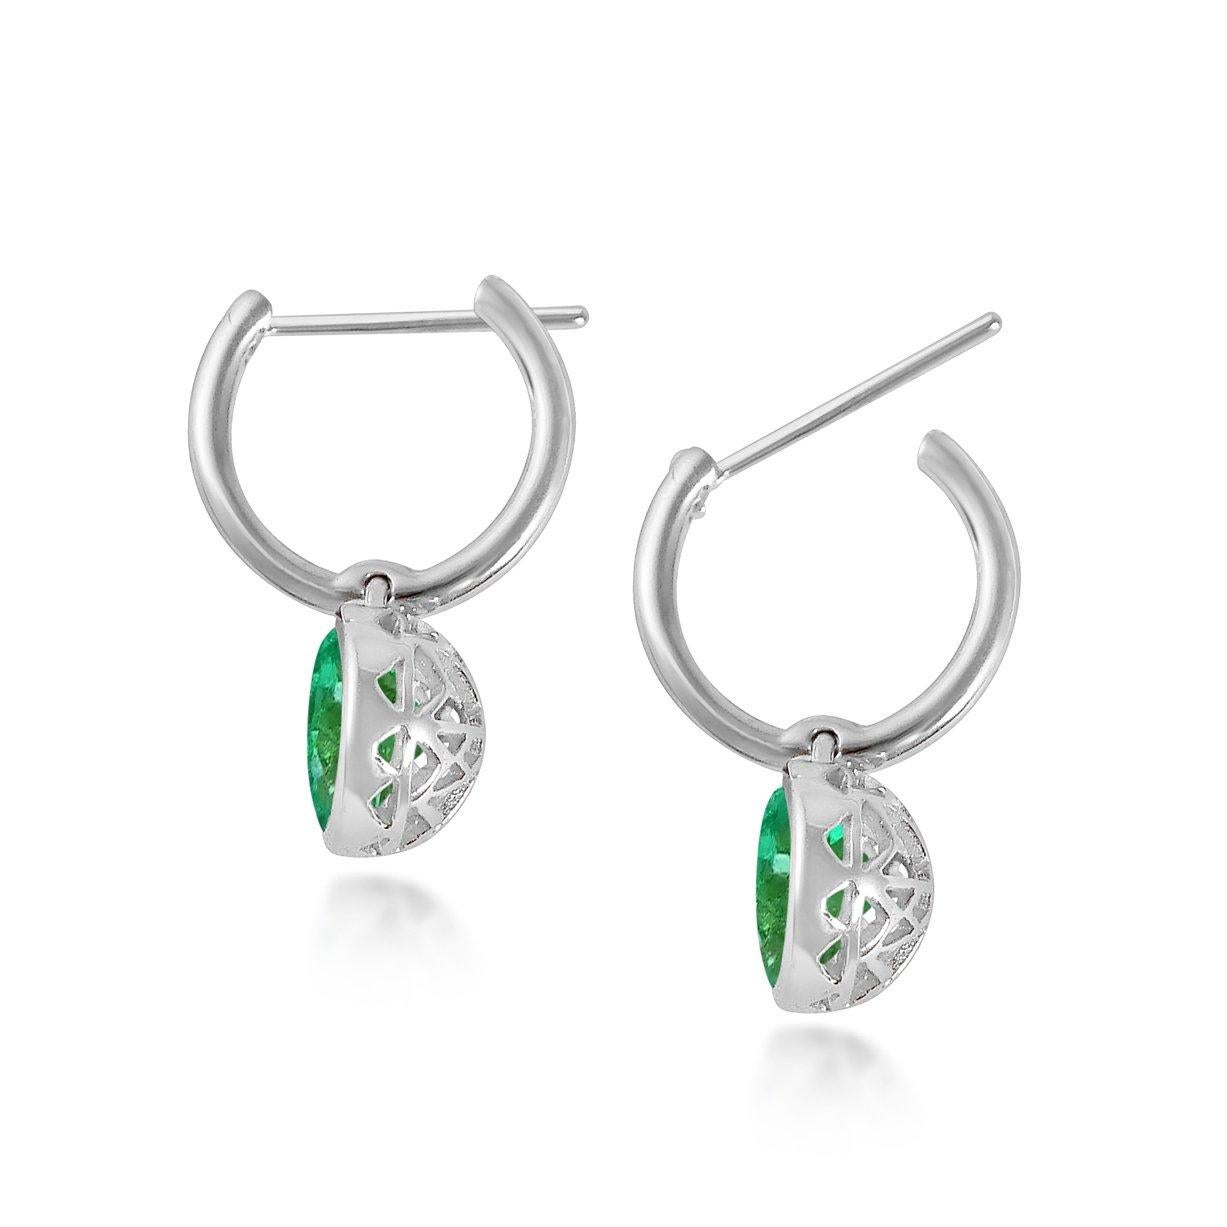 Handcrafted 2.00 Carats Emerald 18 Karat White Gold Drop Earrings. The 8mm natural stones are set in our iconic hand pierced gold lace to let the light through. Our precious and fine stones on our dangling earrings are highlighted by a diamond on